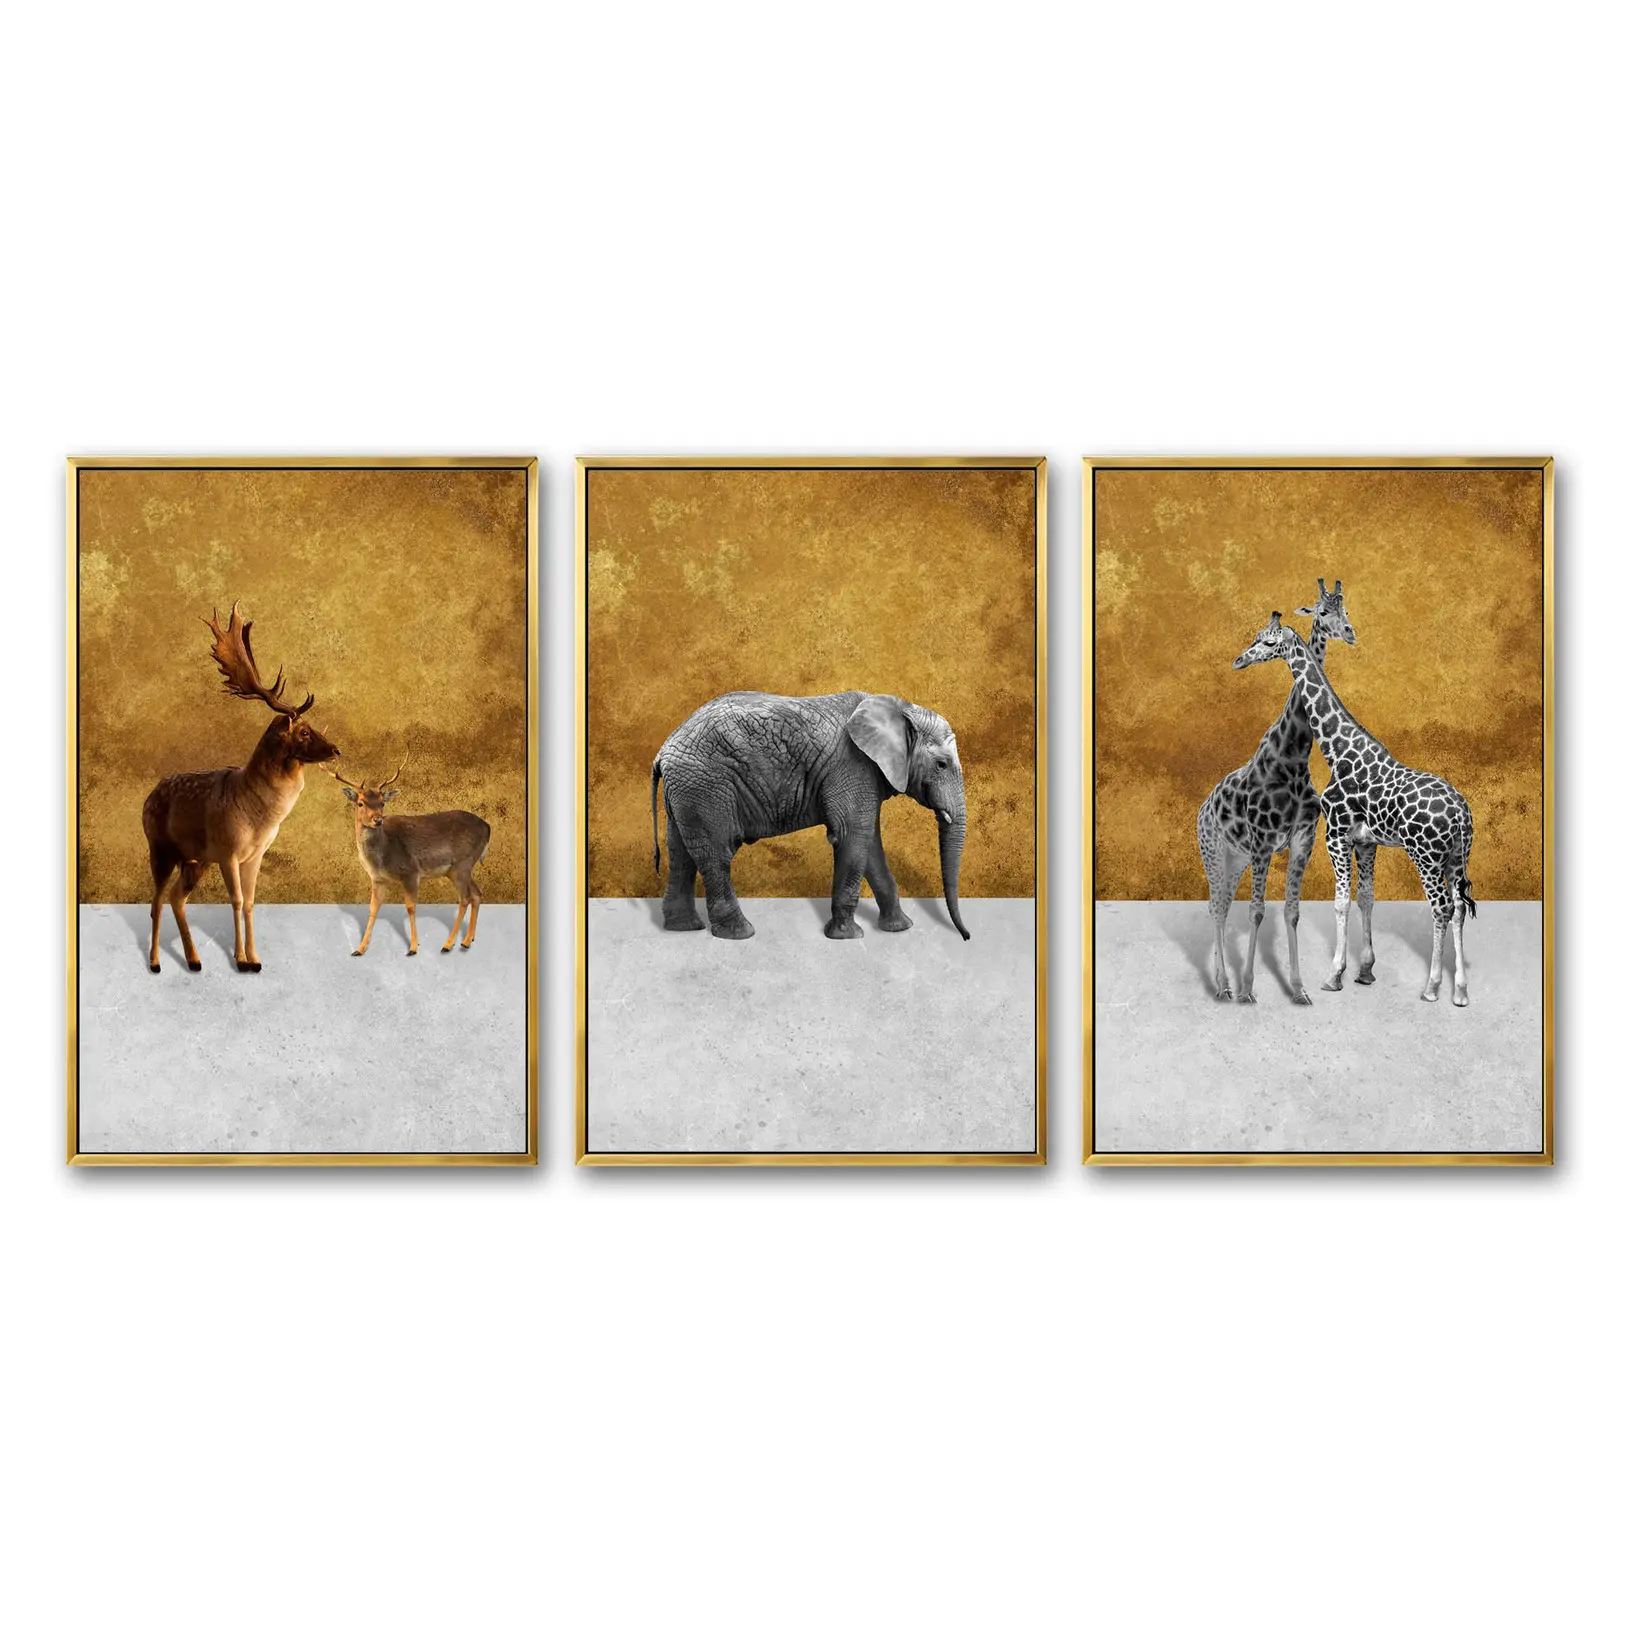 Luxury Golden Outer Frame Large Size Multi-Panel Canvas Wall Art Decor LED Animal Canvas Prints Still Life Home Decor